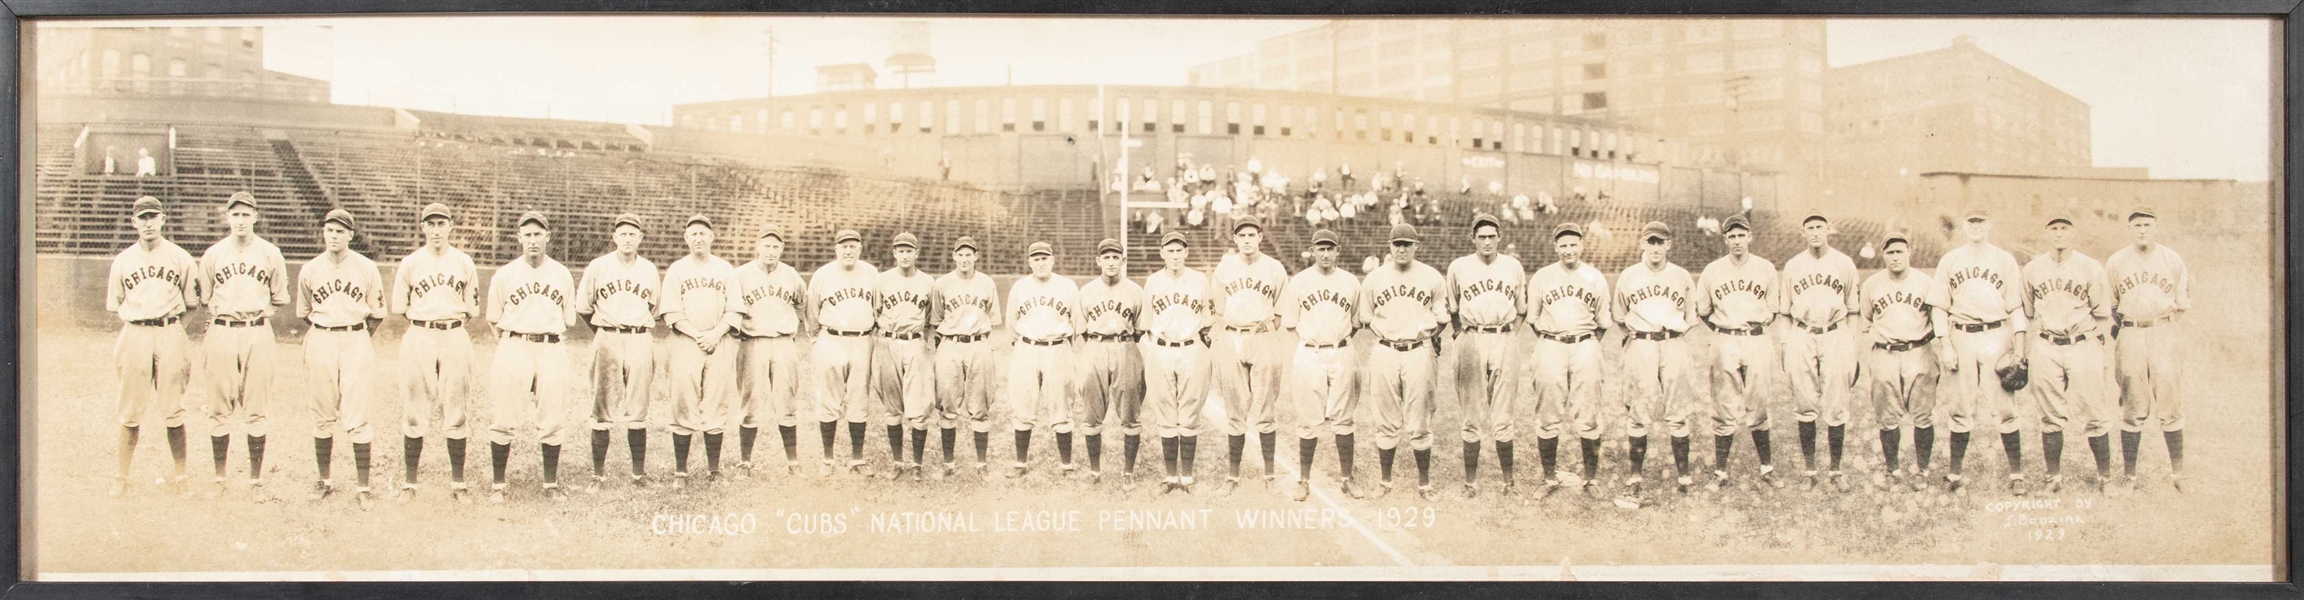 1929 CHICAGO CUBS TEAM PANORAMIC PHOTOGRAPH